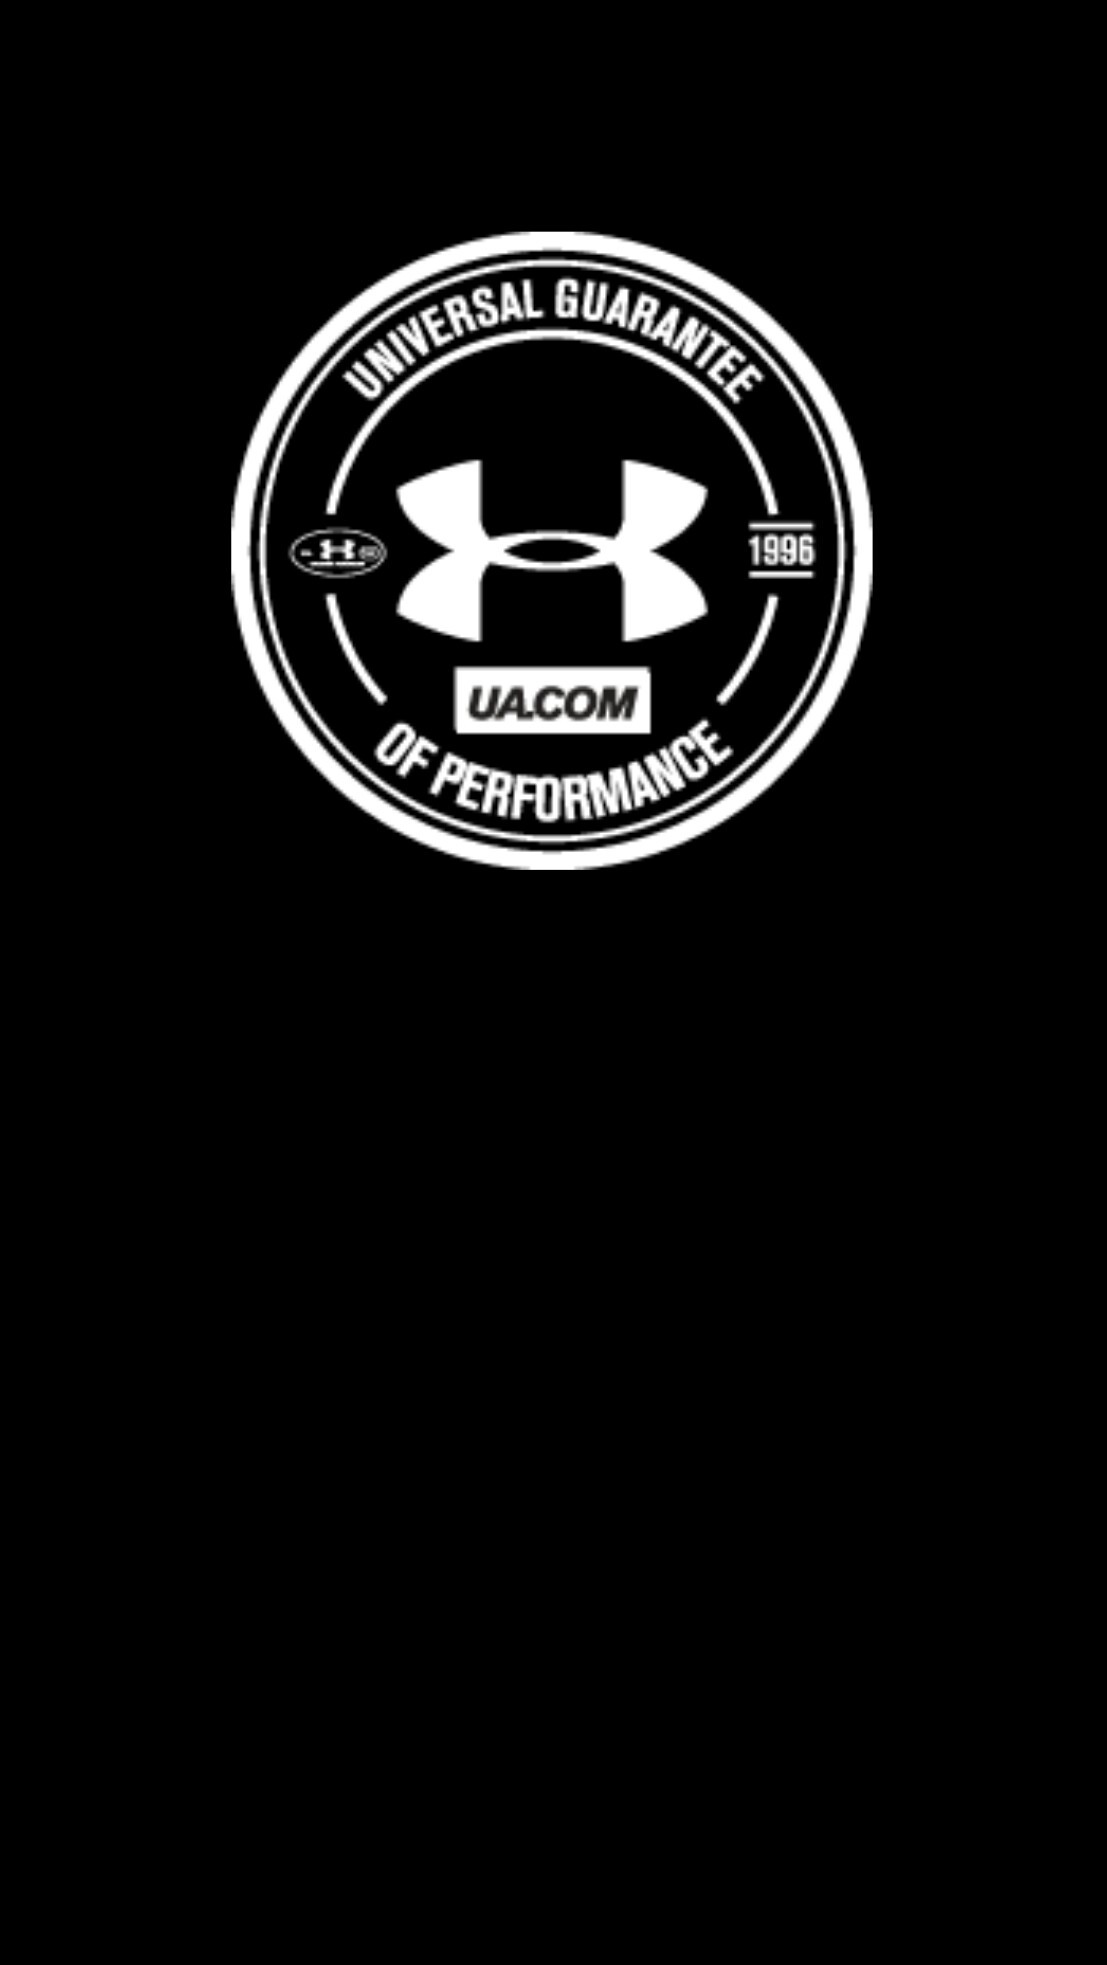 #under armour #black #wallpaper #android #iphone